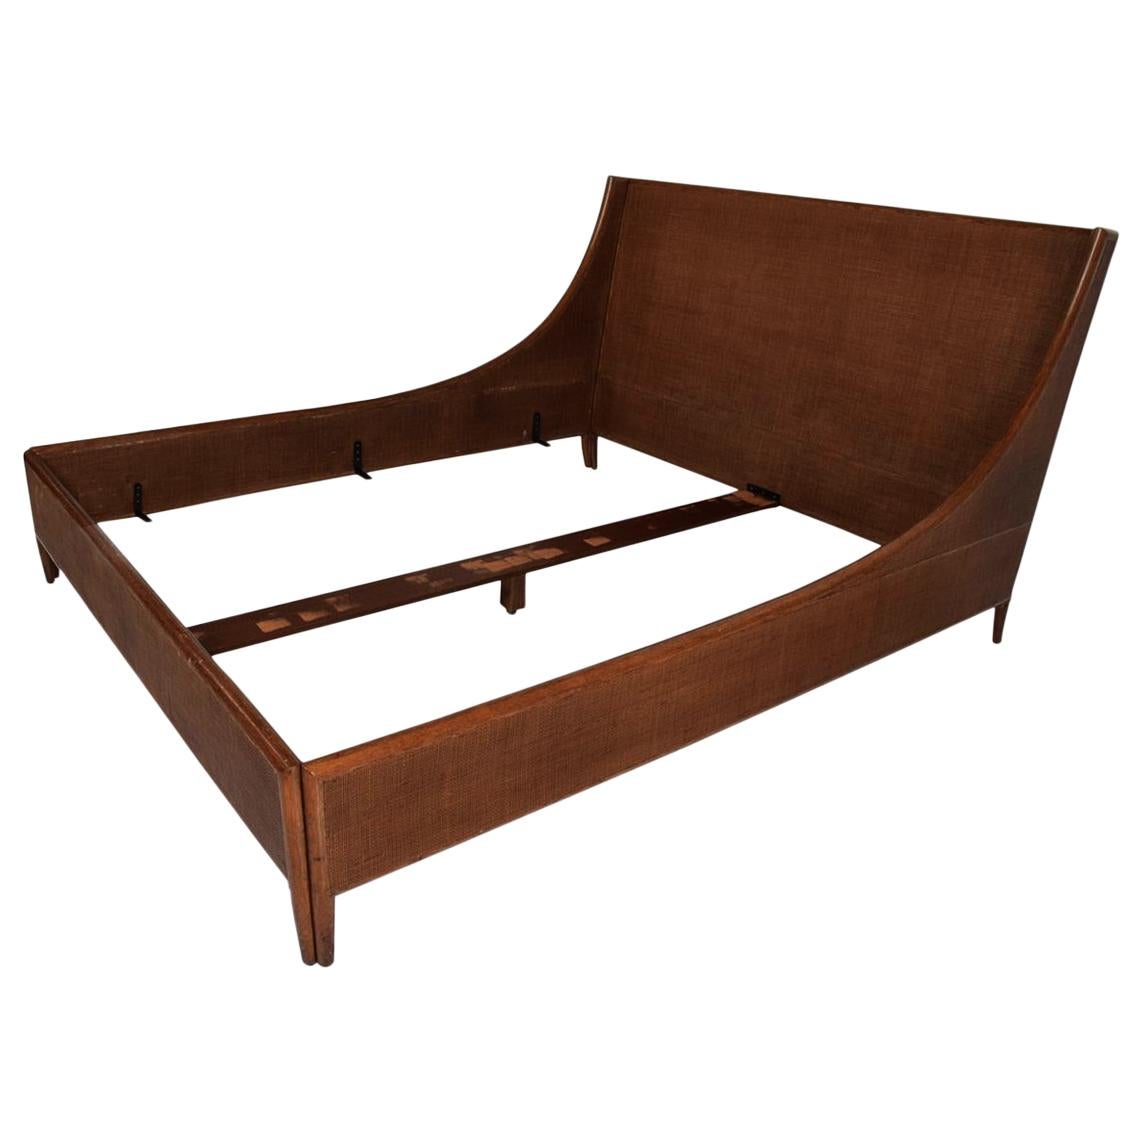 Mid-Century Modern Cal King Bed Frame Designed By Barbara Barry for McGuire / BA